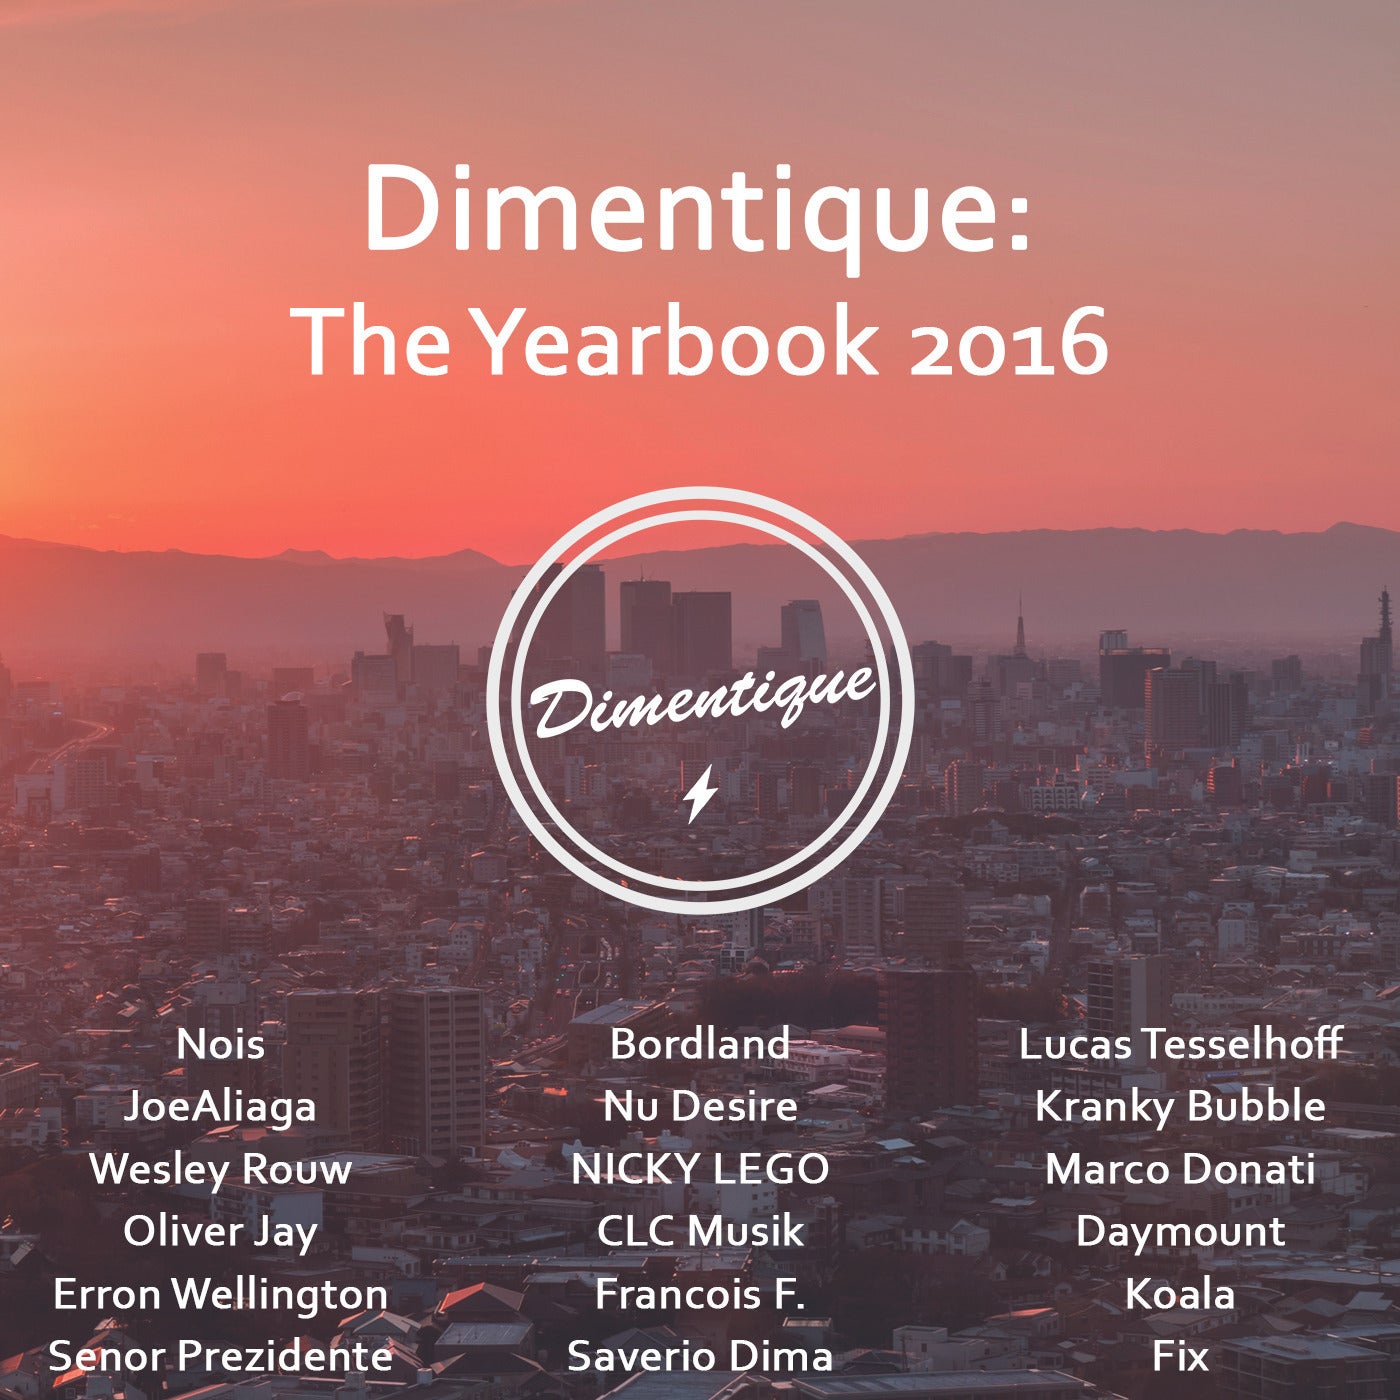 Dimentique: The Yearbook 2016